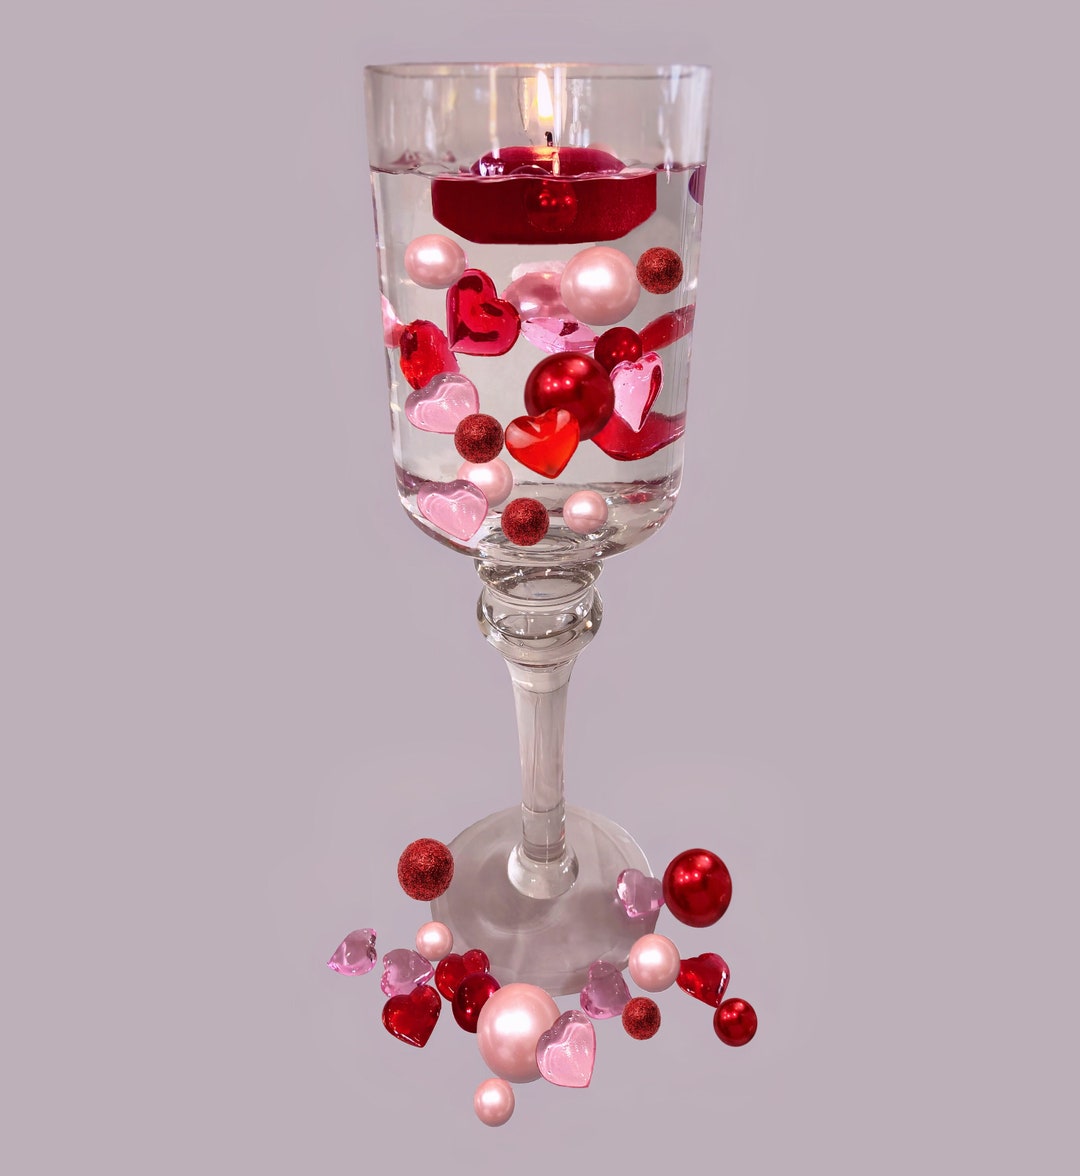 Floating Red Sparkling Stars-Large Sizes-Fills 1 Gallon for Your Vases-With  Option: 3 Submersible Fairy Lights-Vase Decorations